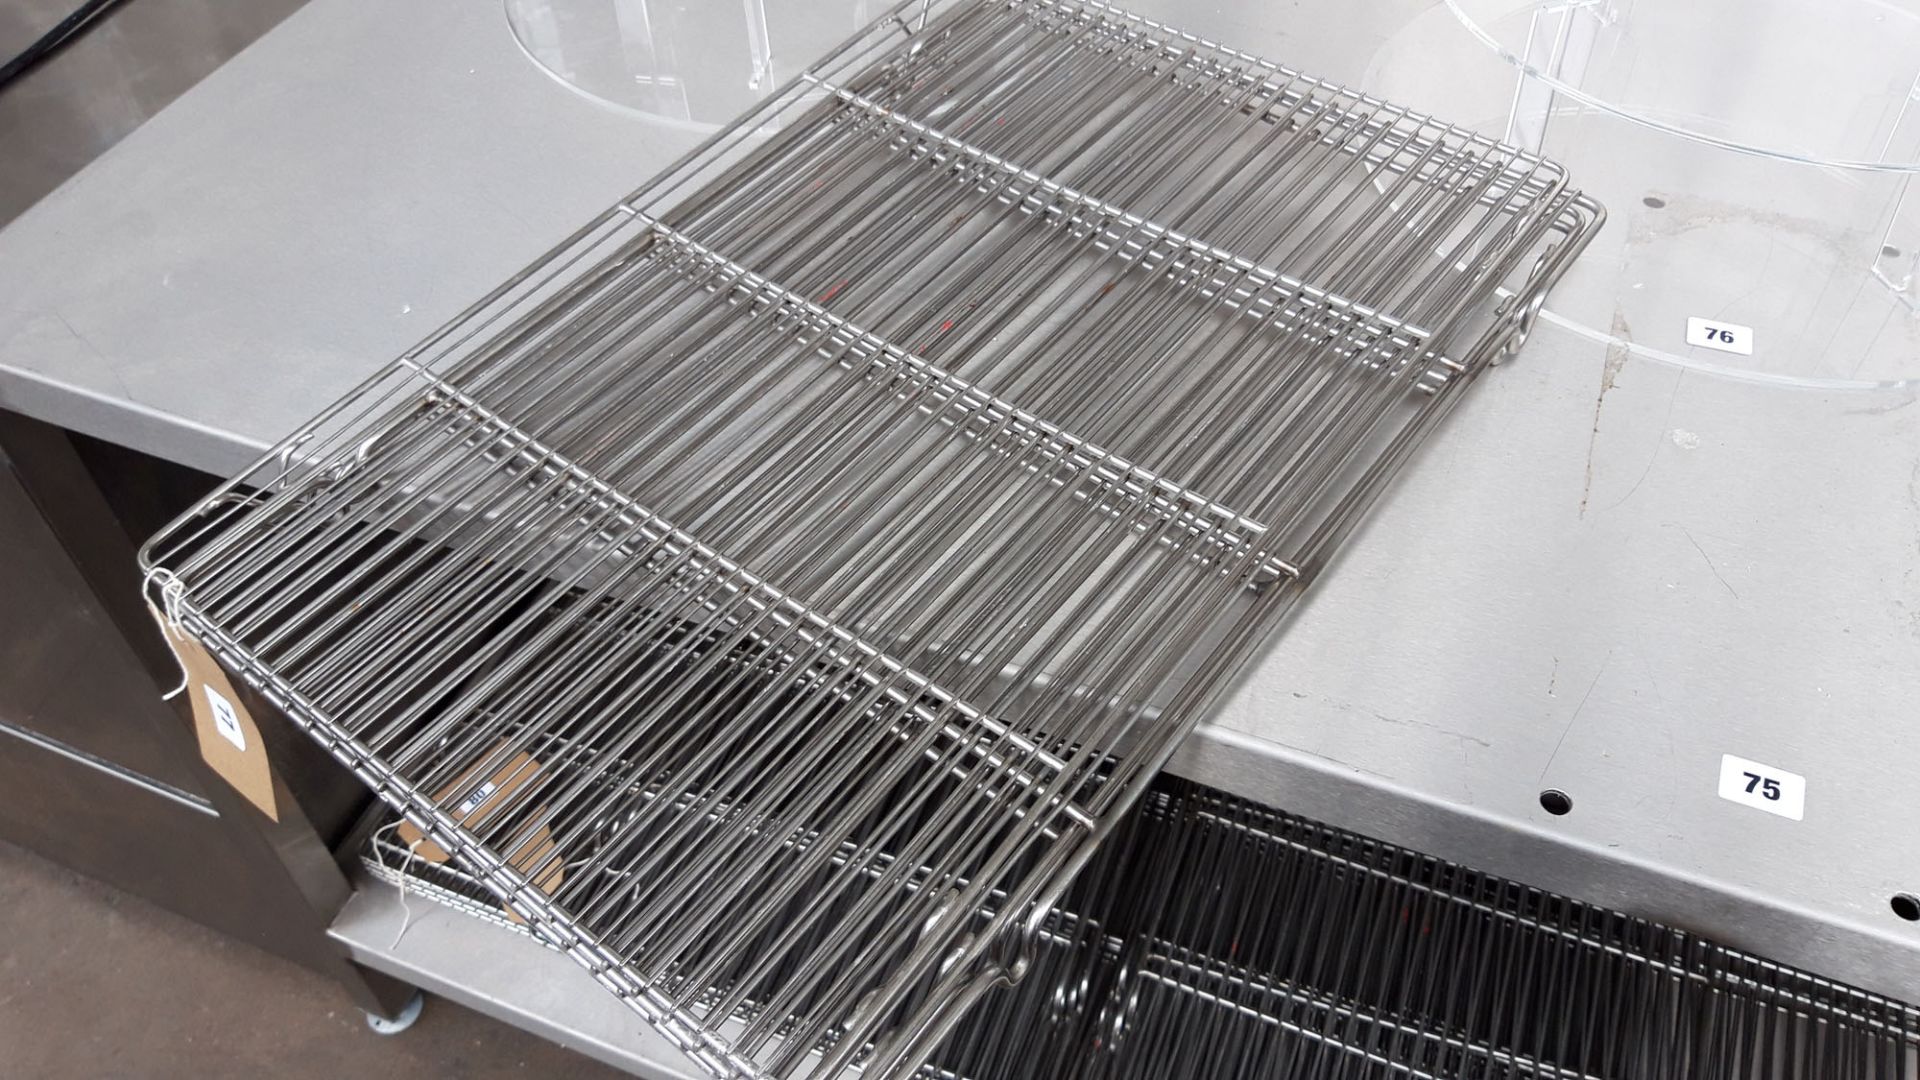 5 stainless steel oven trays